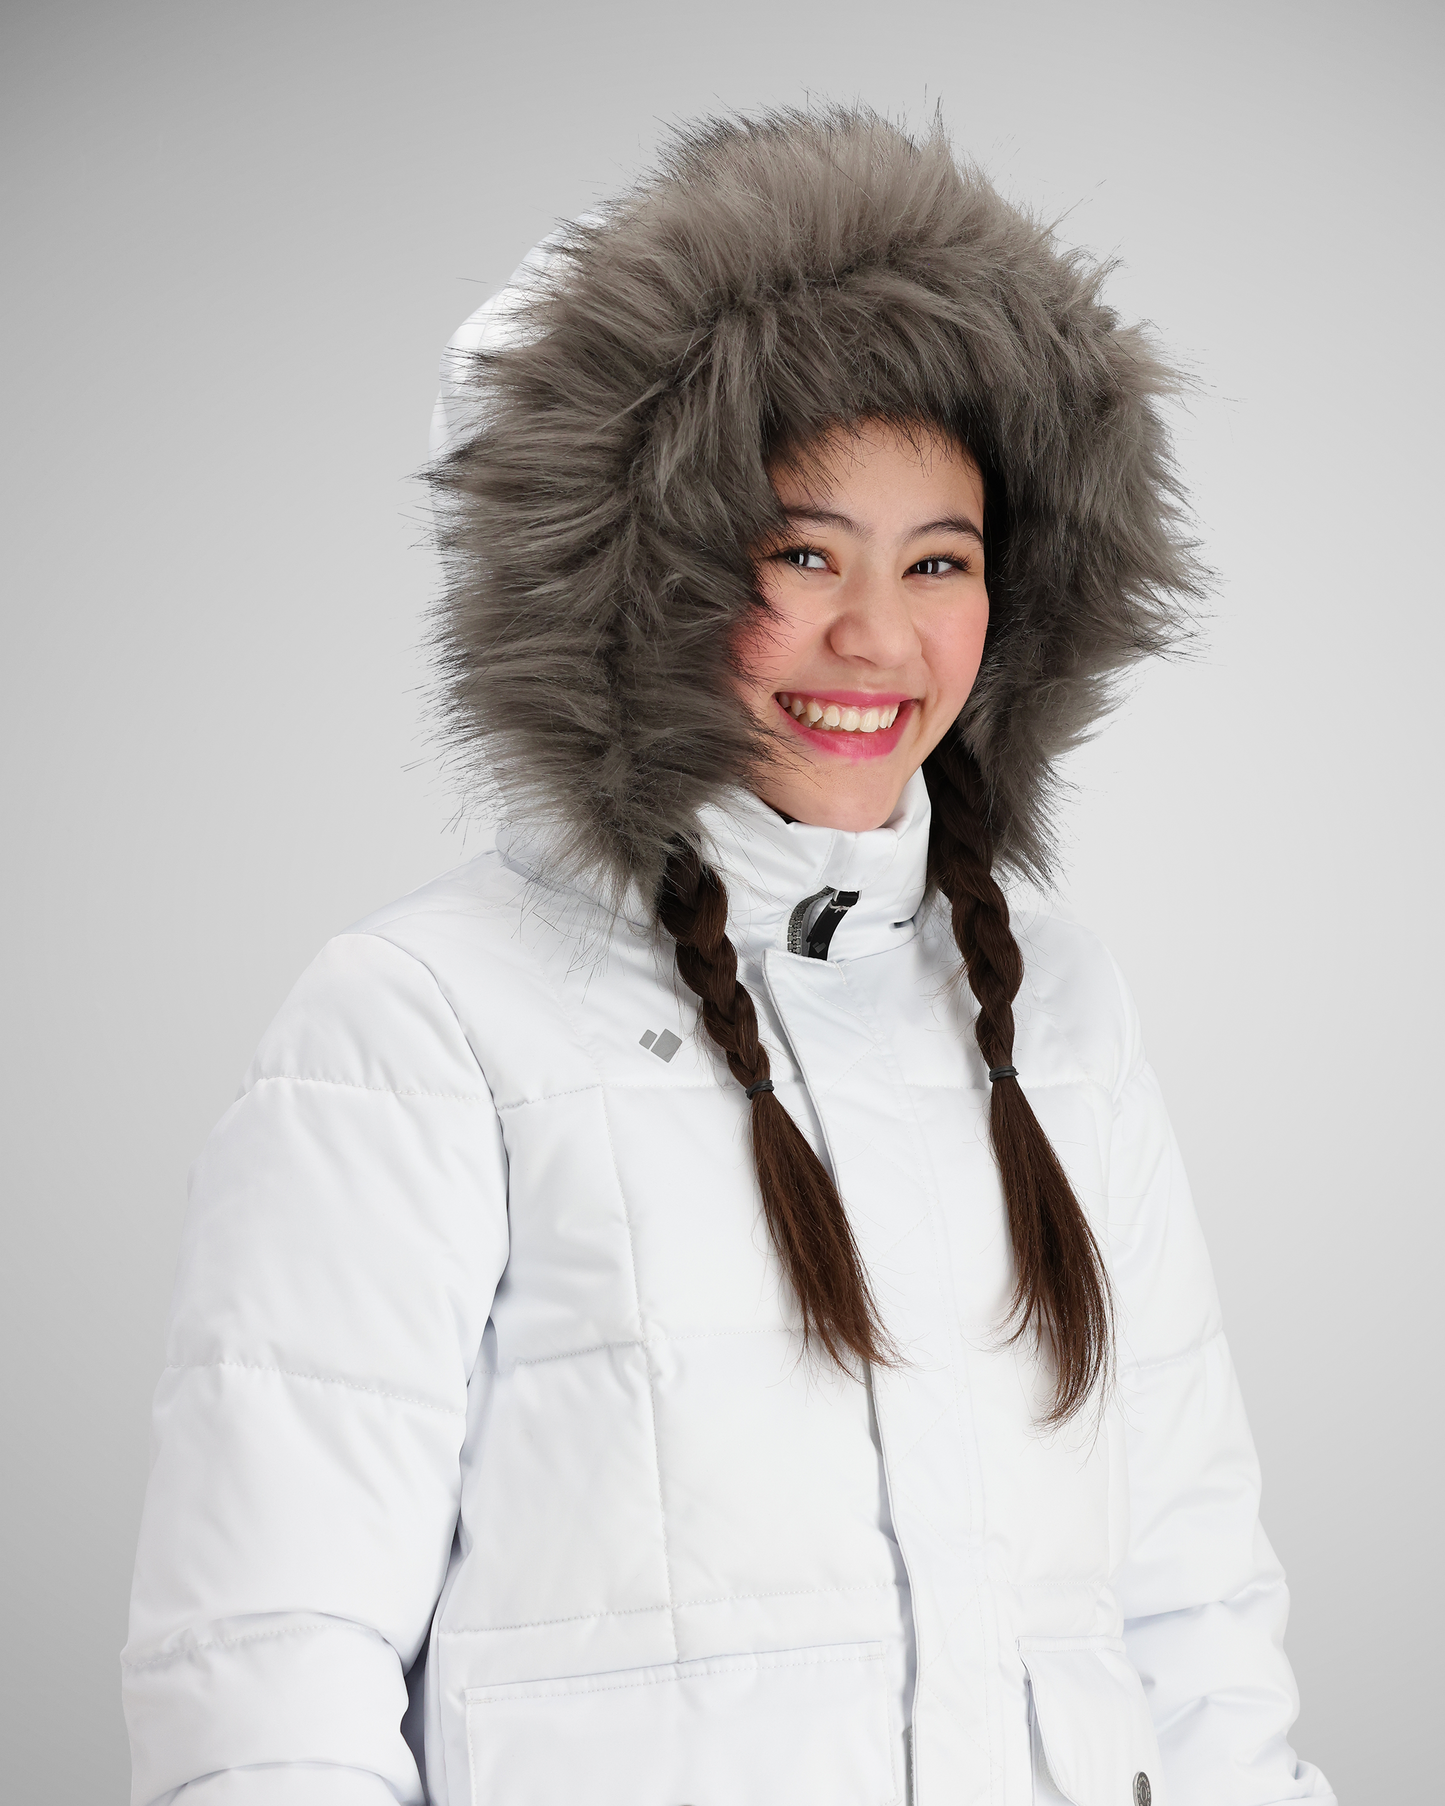 Removable faux fur | Removable faux fur	Extra style, warmth and protection from the elements when you need it, and easily removable for the times when you don't.